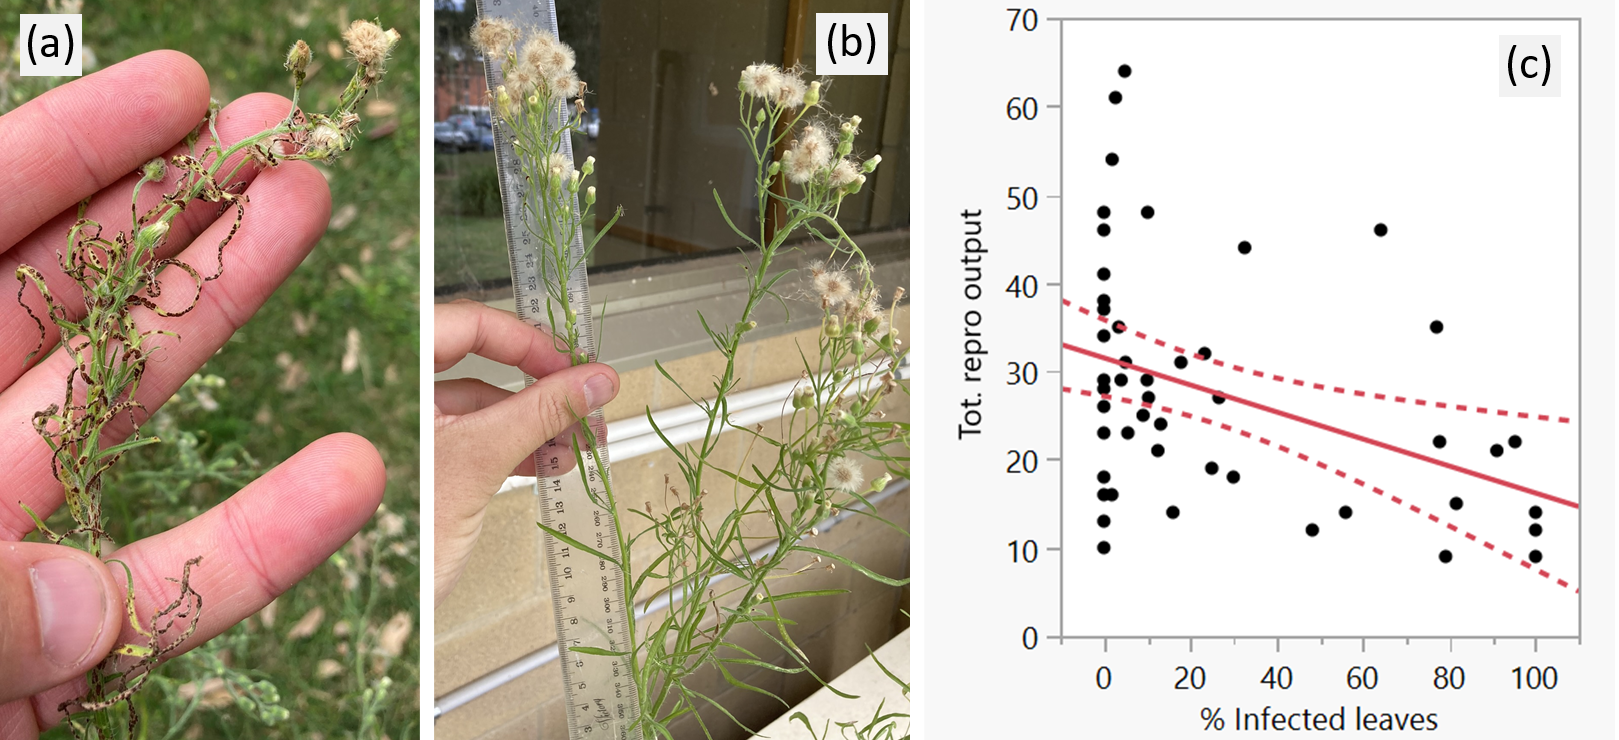 Images and a graph showing the results of fungal inoculation experiment on the reproductive output of host flaxleaf fleabane plants: (a) heavily infected and (b) non-infected inflorescences, and (c) linear relationship between reproductive output (number of flower heads per inflorescence) and % of infected leaves per inflorescence.